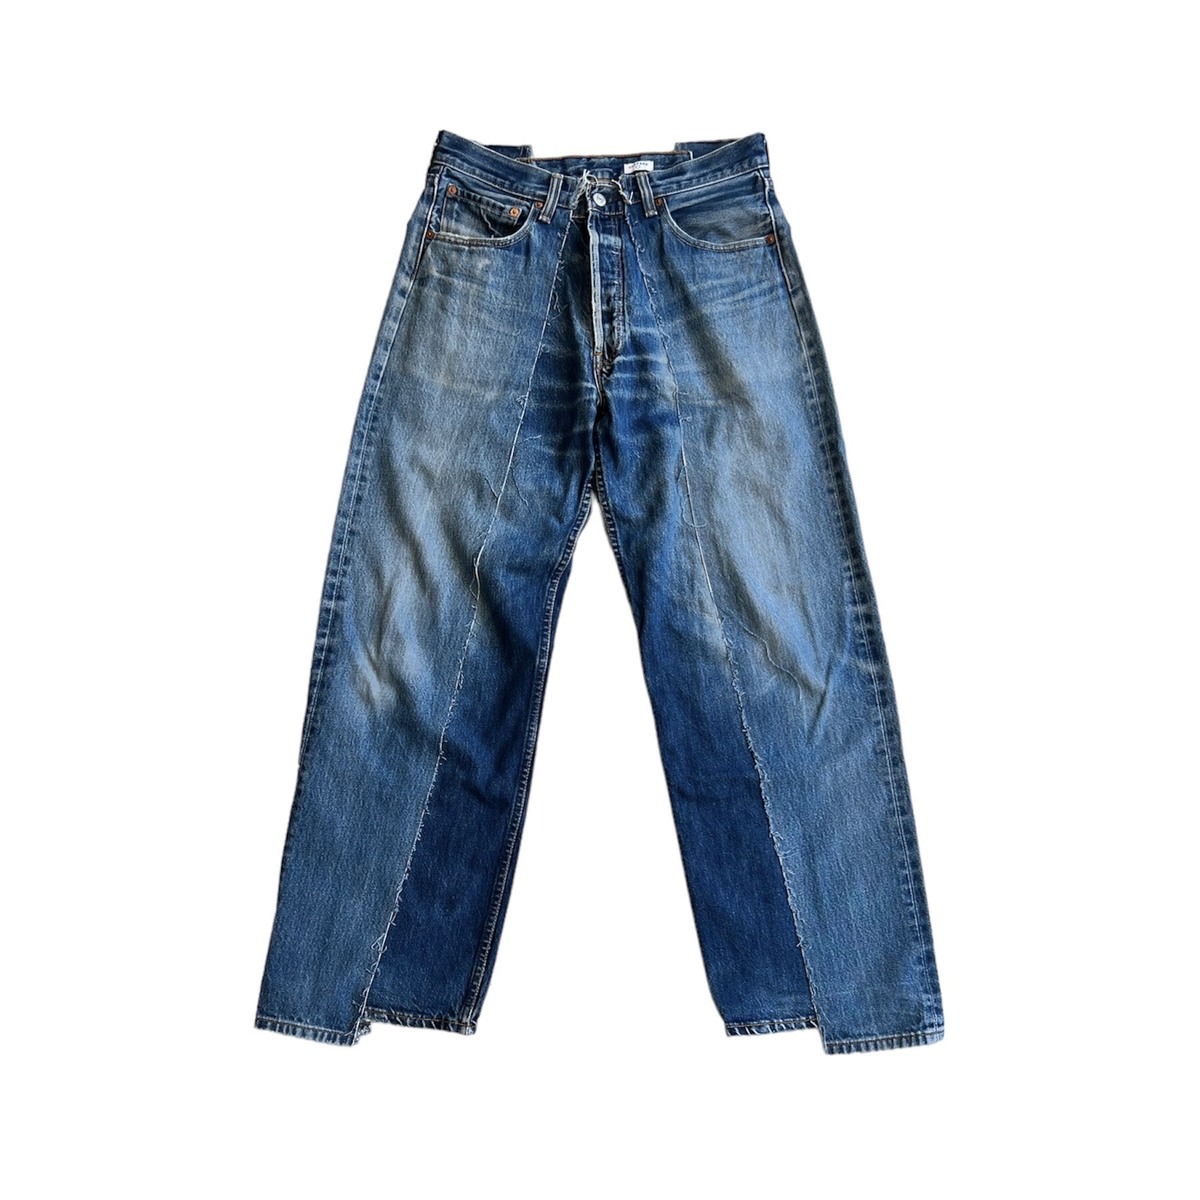 OLDPARK baggy jeans blue-M - 画像2枚目